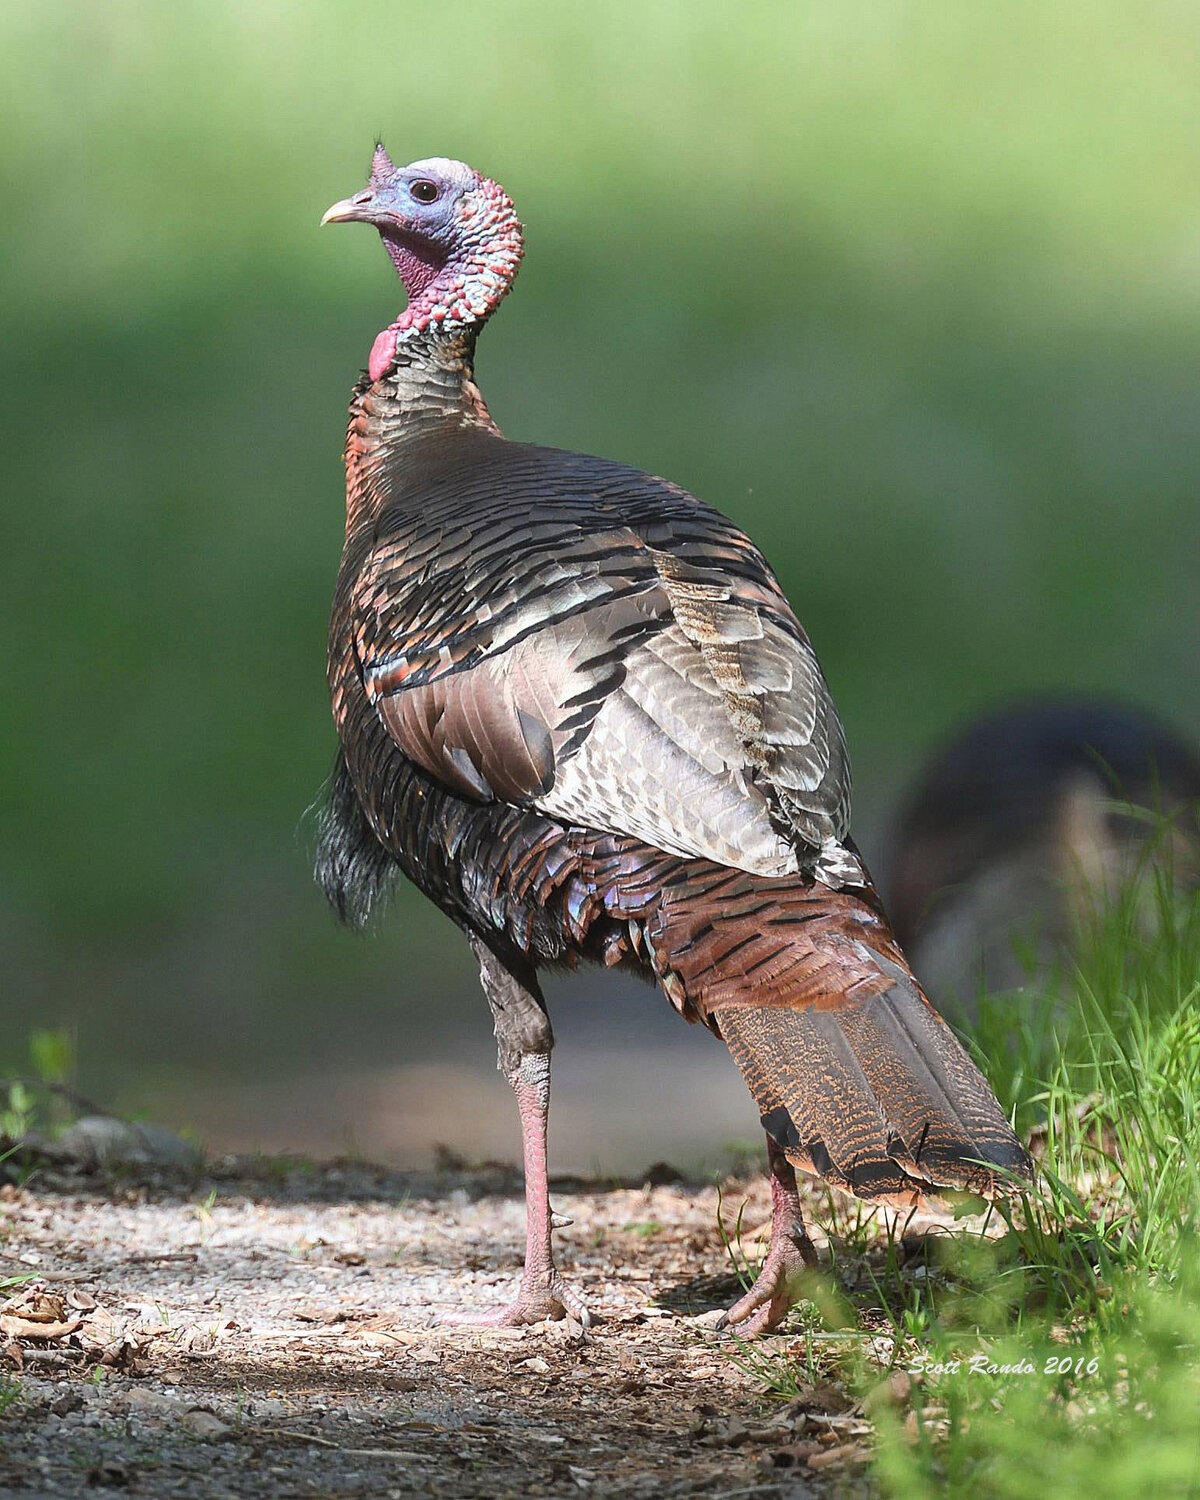 Male turkeys are frequently portrayed in the media with their tails spread out, which is their behavior during spring courtship. Much gobbling is also heard. This male is just foraging, and is not putting on a display. ..Note the red on the head and neck, and the beard—a tuft of feathers growing out of the breast. A few females might have beards, but they are smaller. ..Males have spurs, which face backward just above the foot. The spurs on this male are about 1/2 inch long; this suggests that this individual is about two years old.